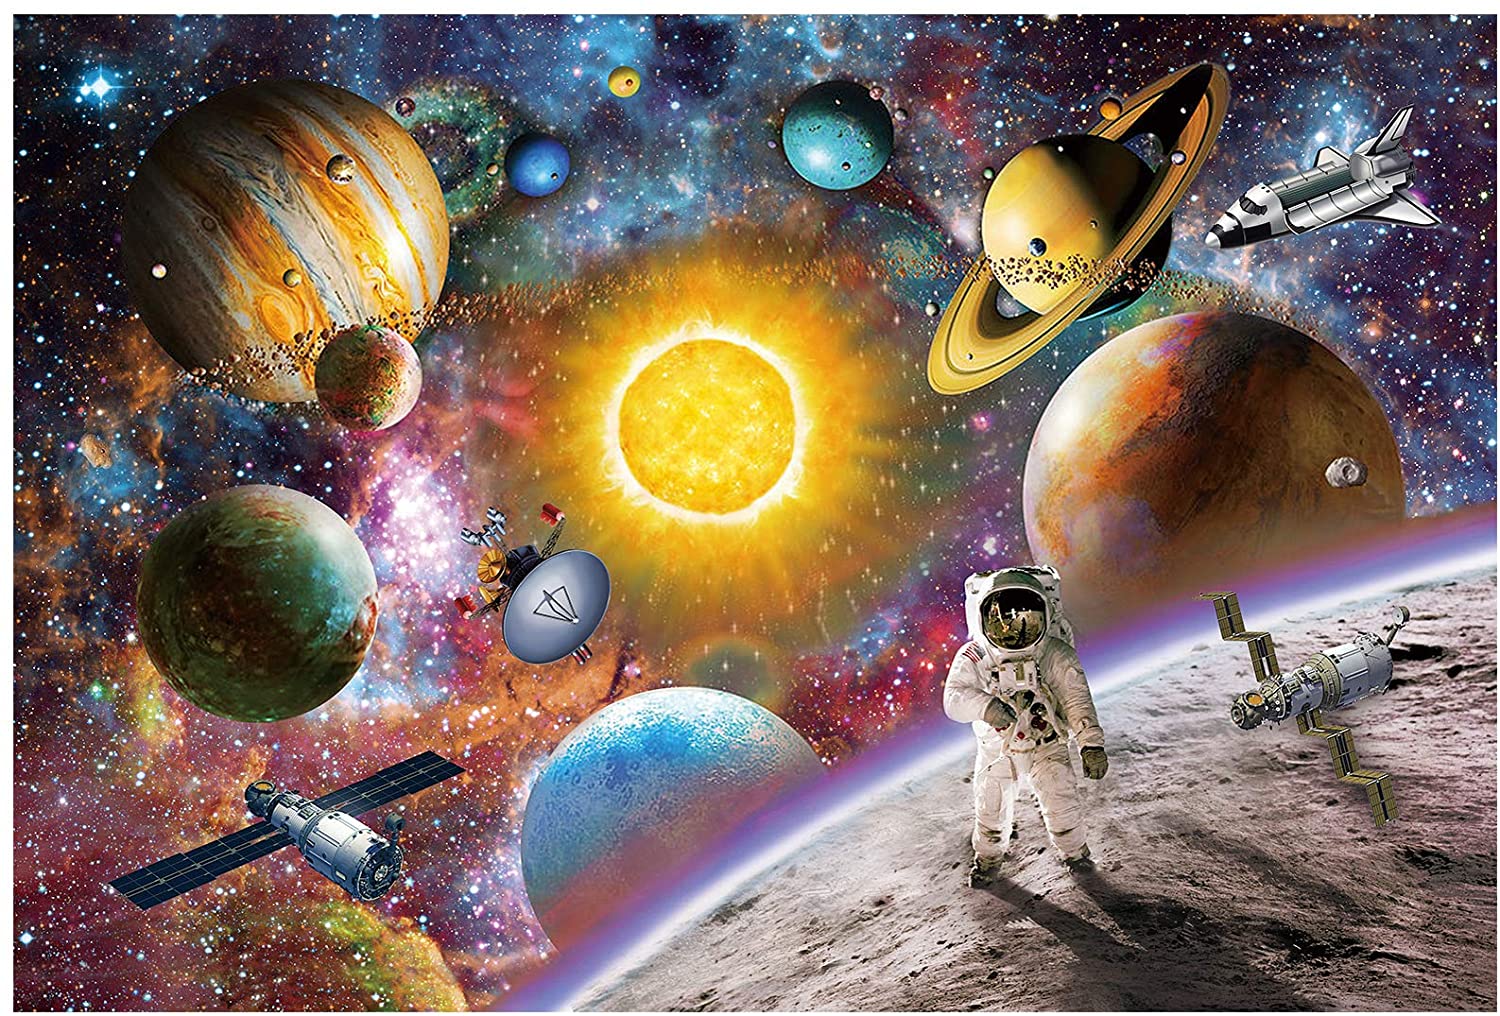 Universe Space Planets Puzzle Jigsaw Puzzles 1000 PCS Kids Adult Family Game Toy 